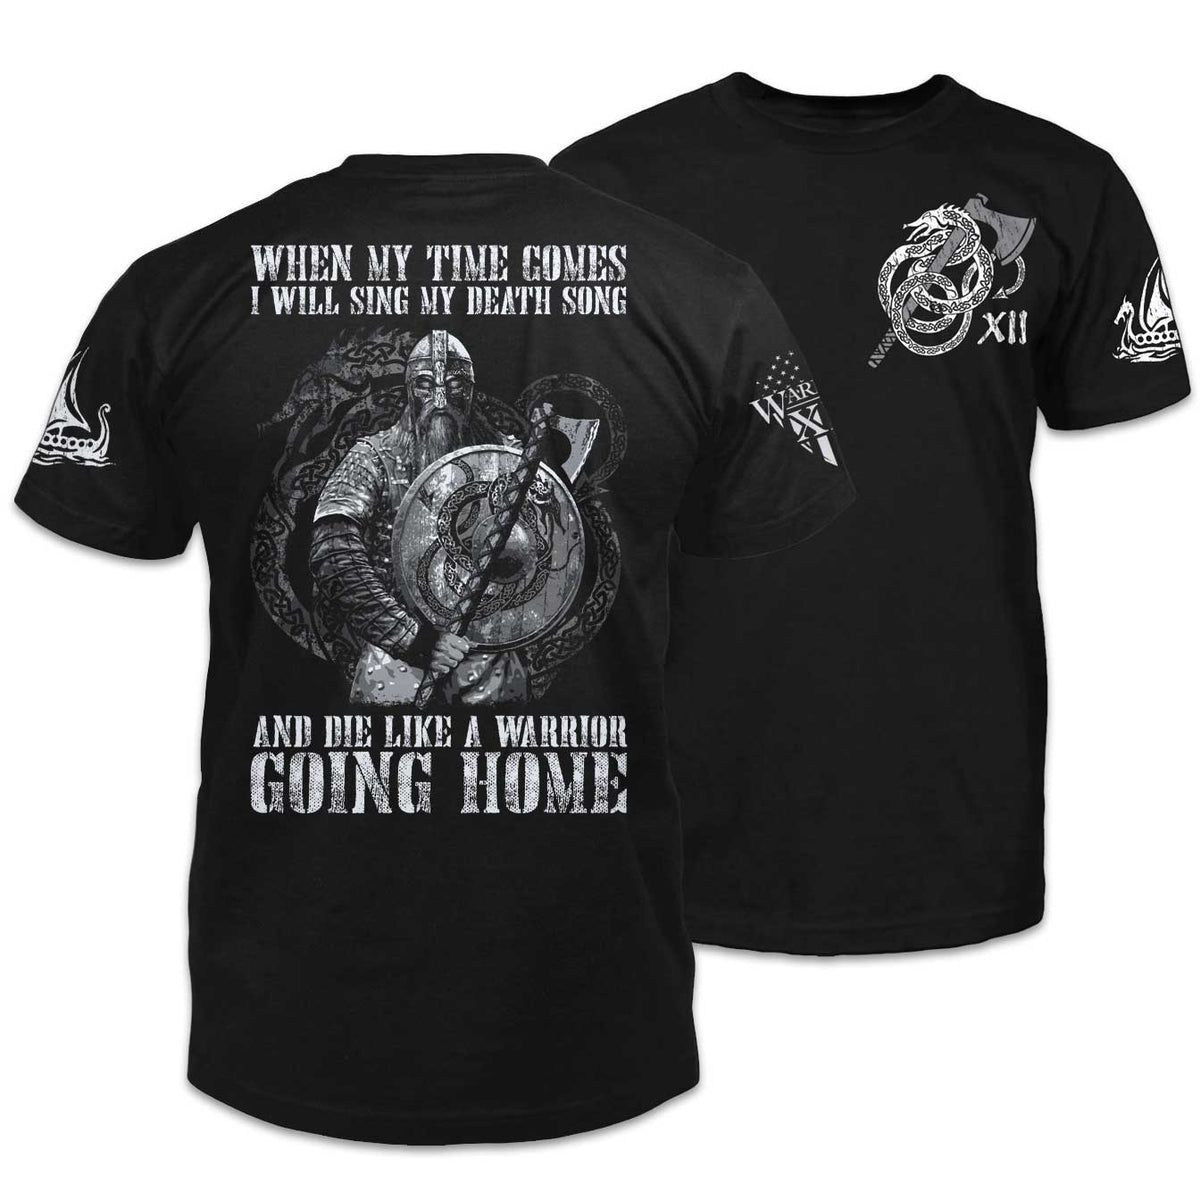 Front and back black t-shirt with the words "When my time comes, I will sing my death song and die like a warrior going home" and  fearless Viking warrior with a Nordic dragon in the background printed on the shirt.